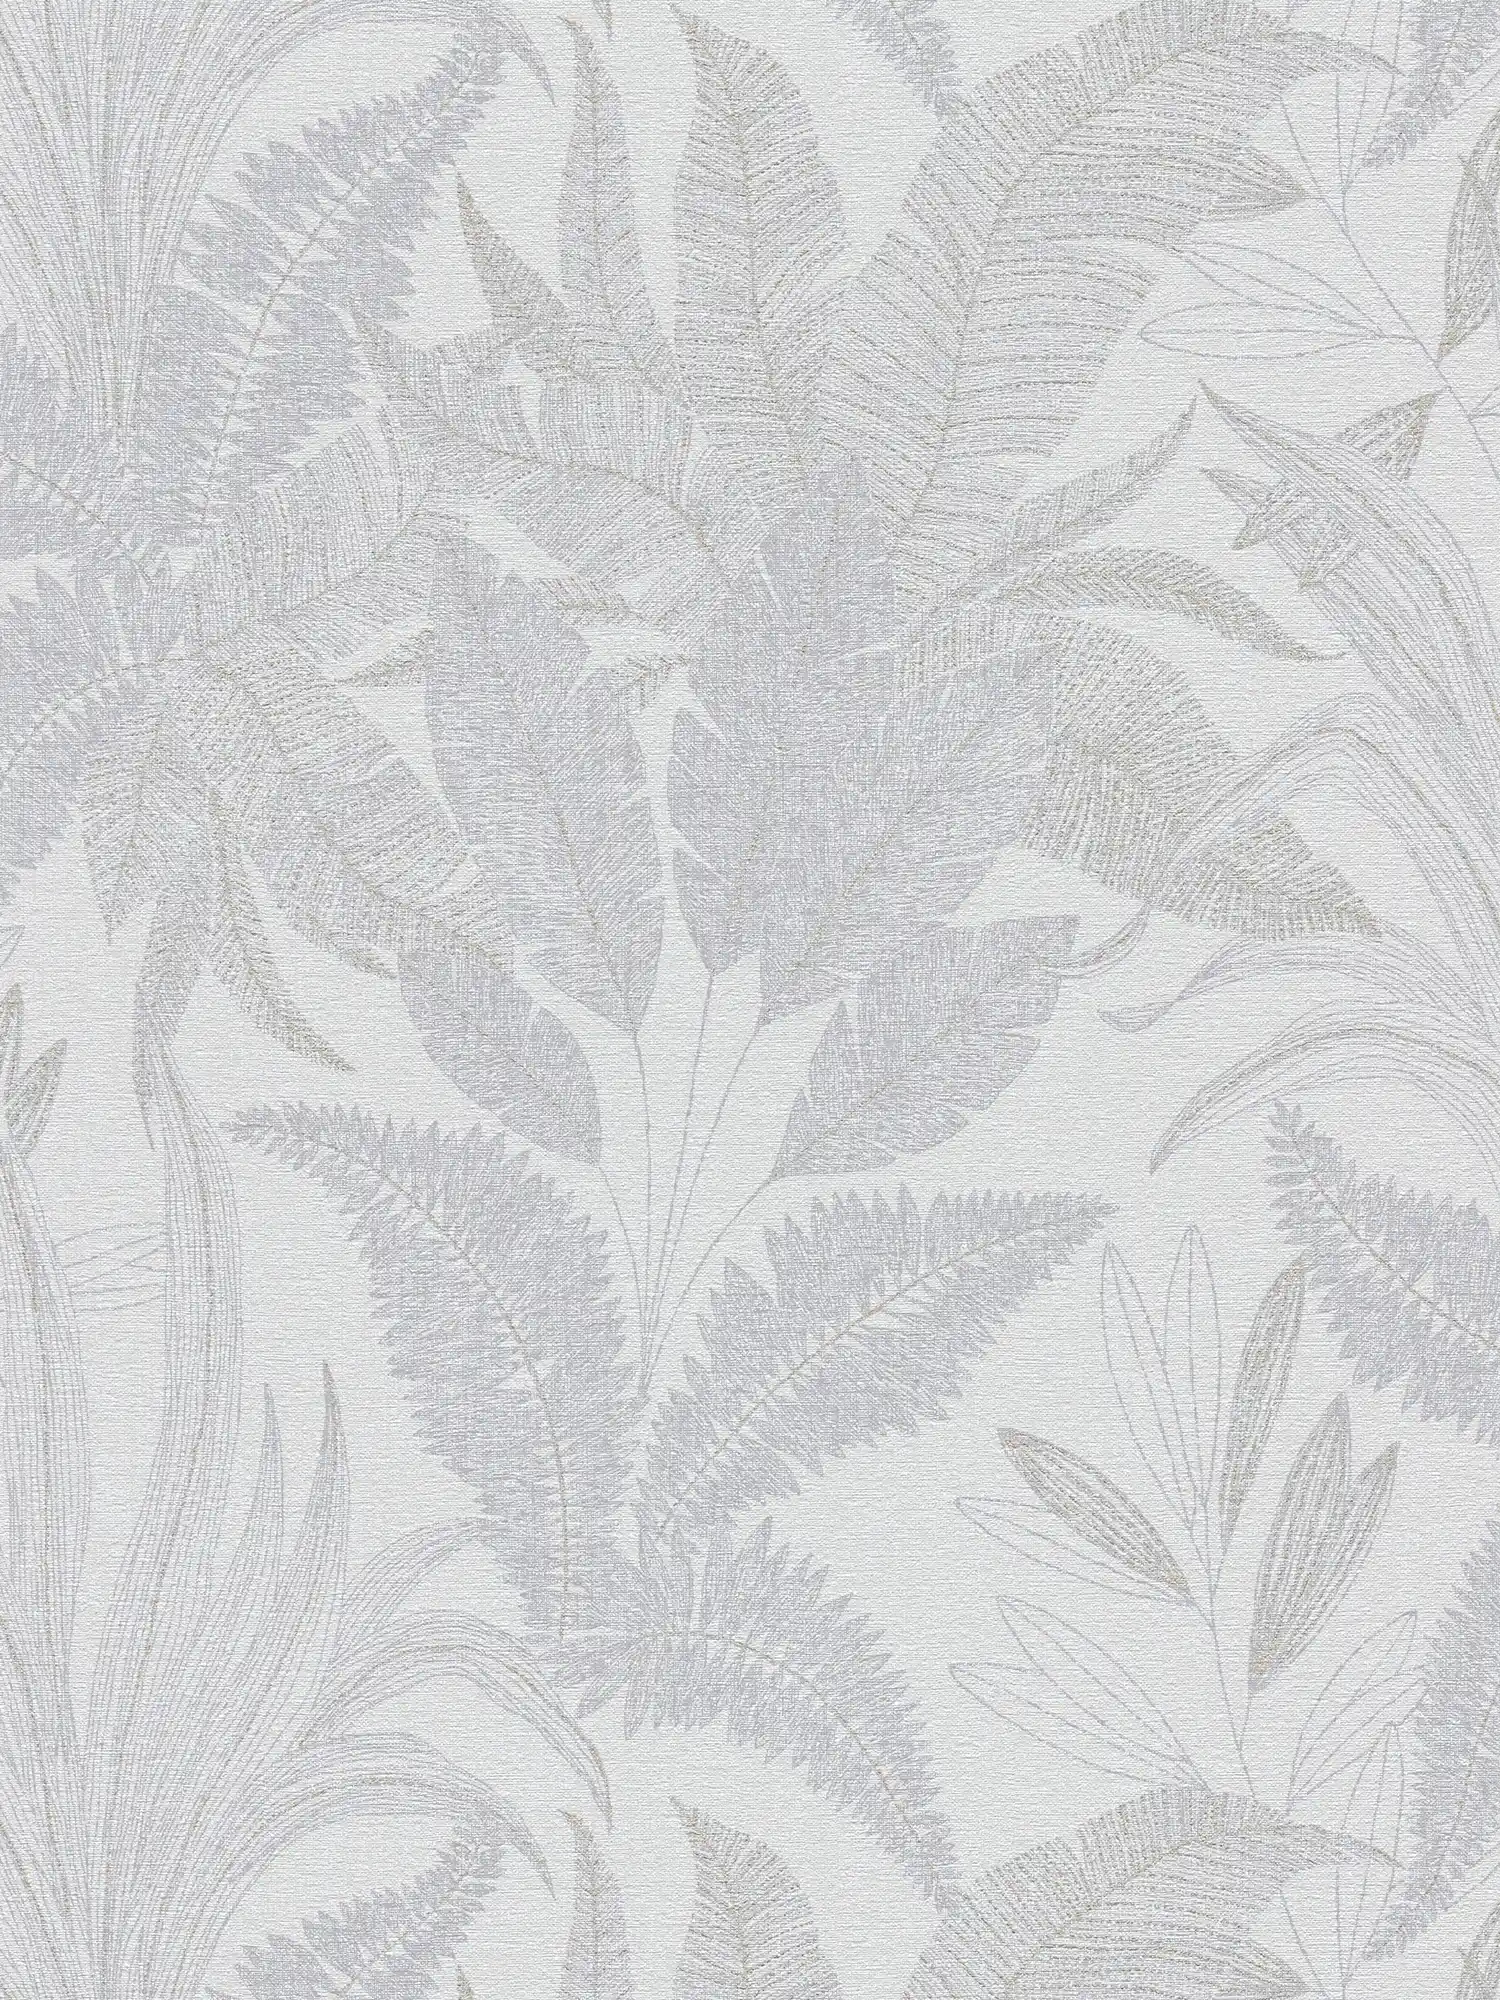 Non-woven wallpaper with jungle leaves - lightly textured pattern - grey, cream, gold
